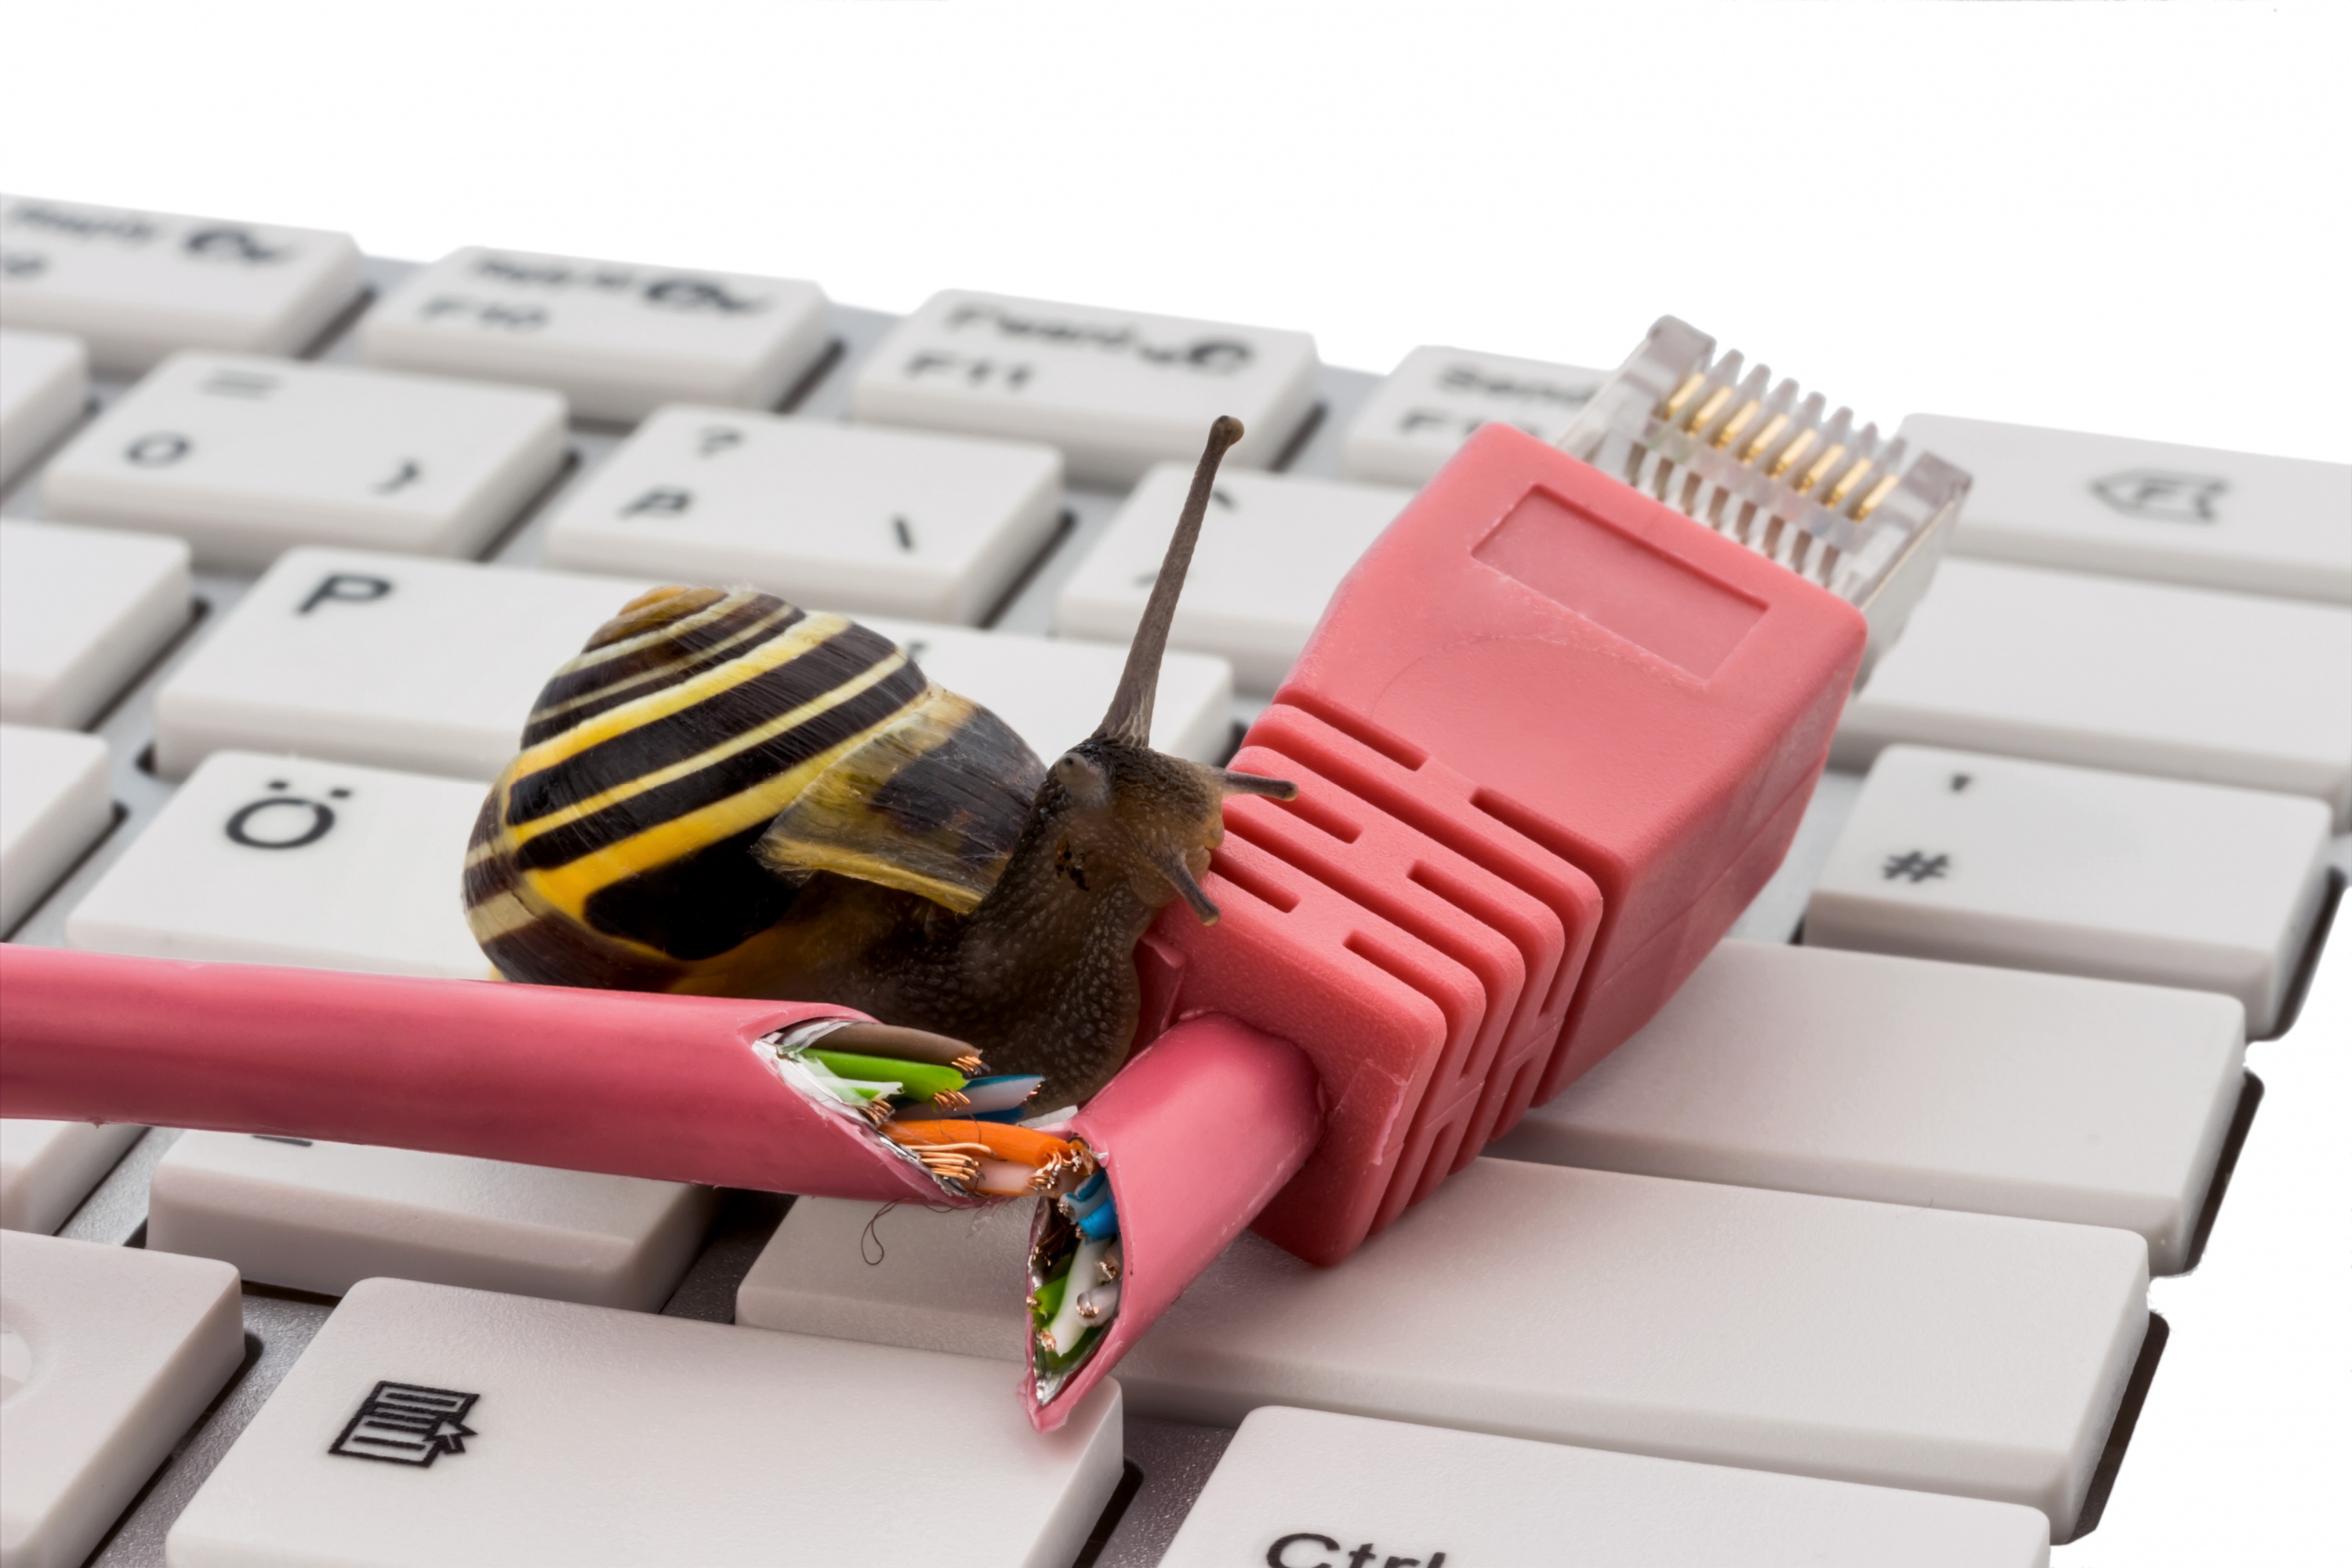 can spyware Turtle-like down internet